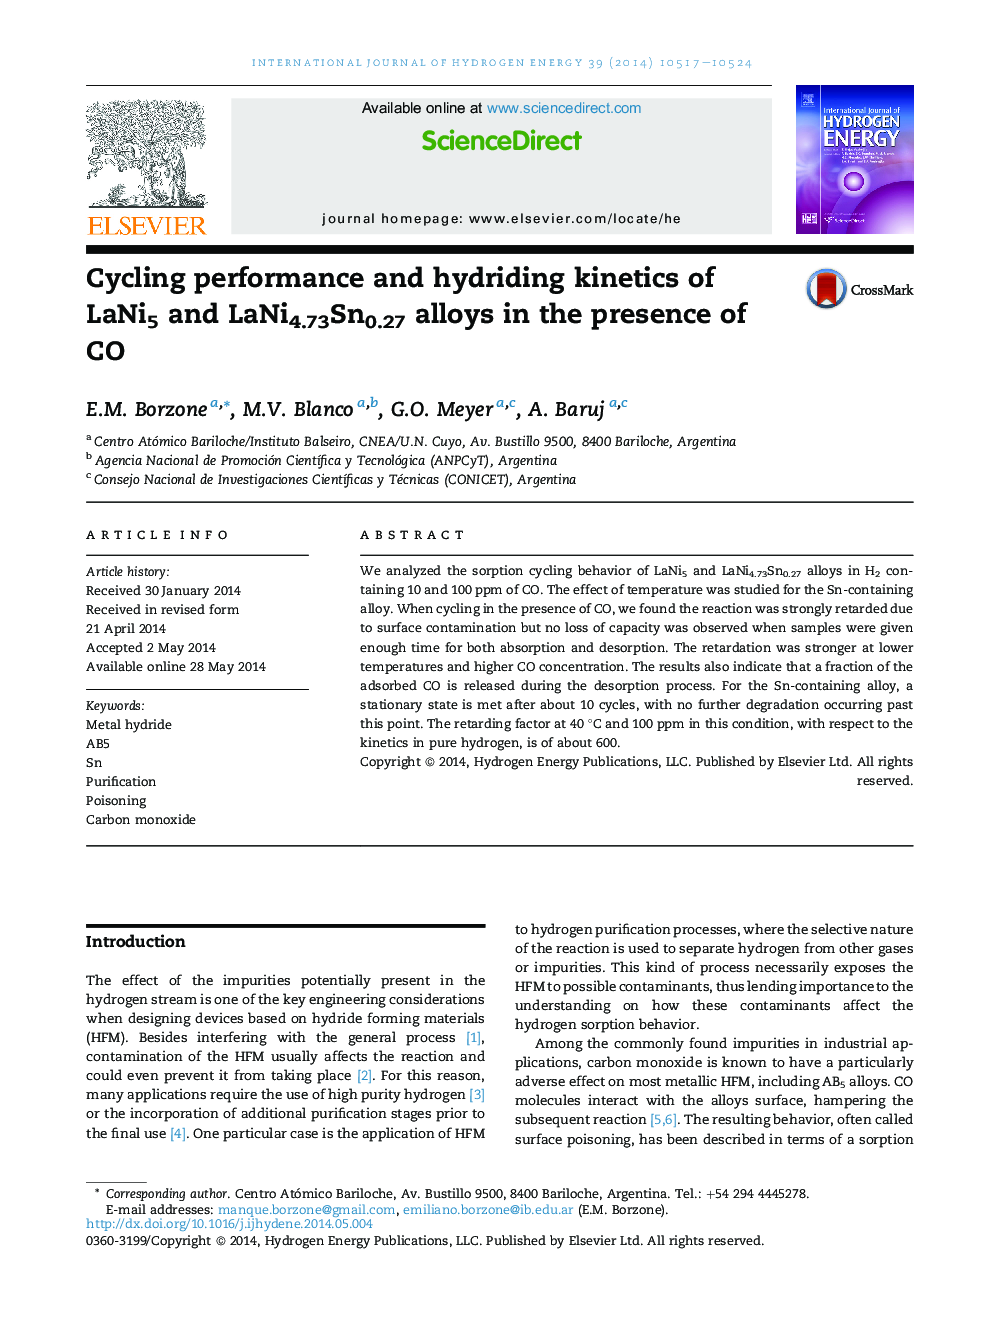 Cycling performance and hydriding kinetics of LaNi5 and LaNi4.73Sn0.27 alloys in the presence of CO